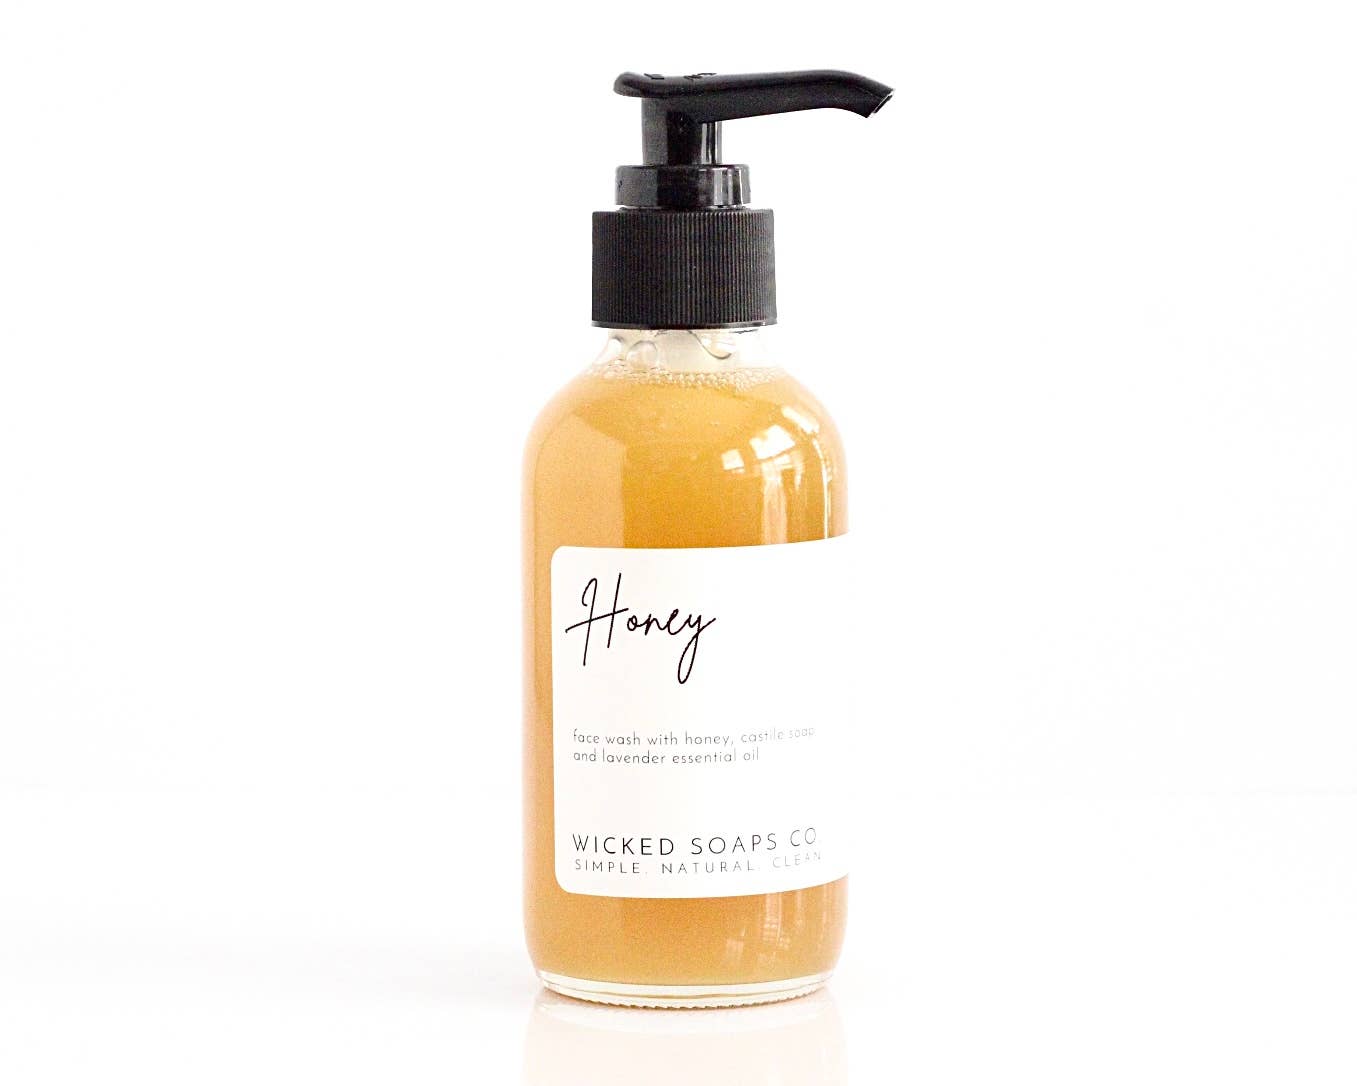 Wicked Soaps Co. - Honey Face Wash